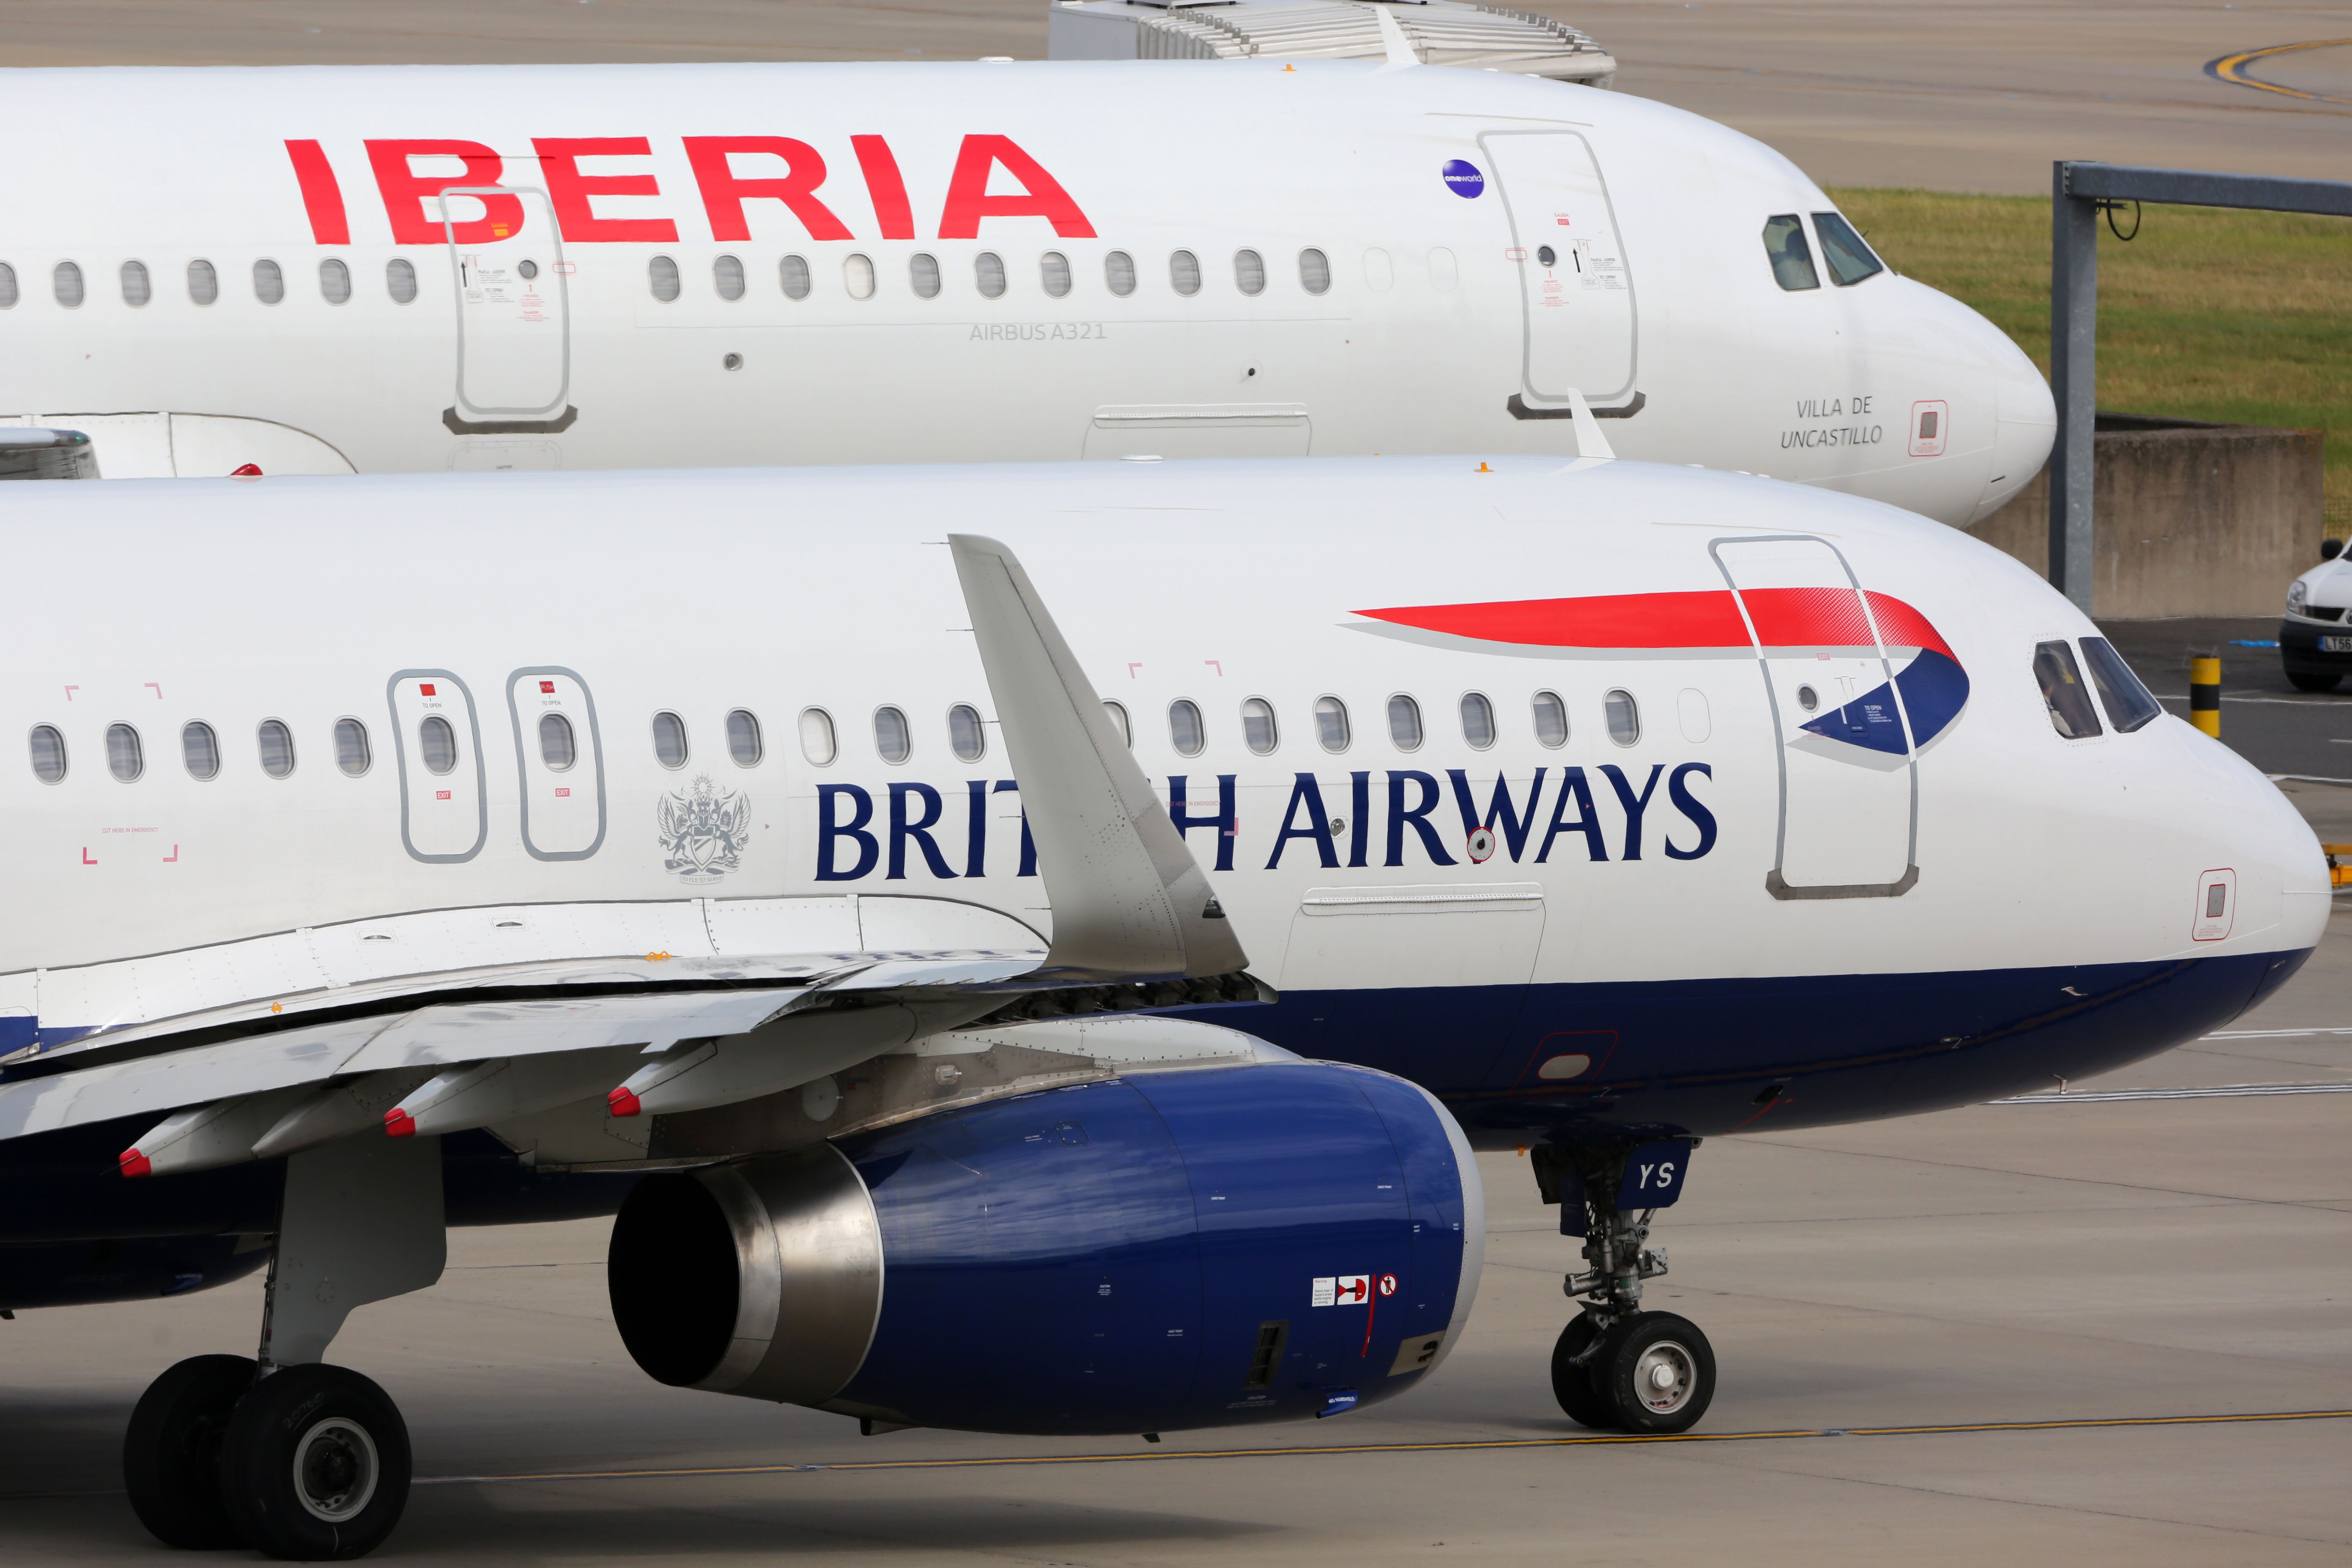 Iberia and British Airways aircraft parked side by side.